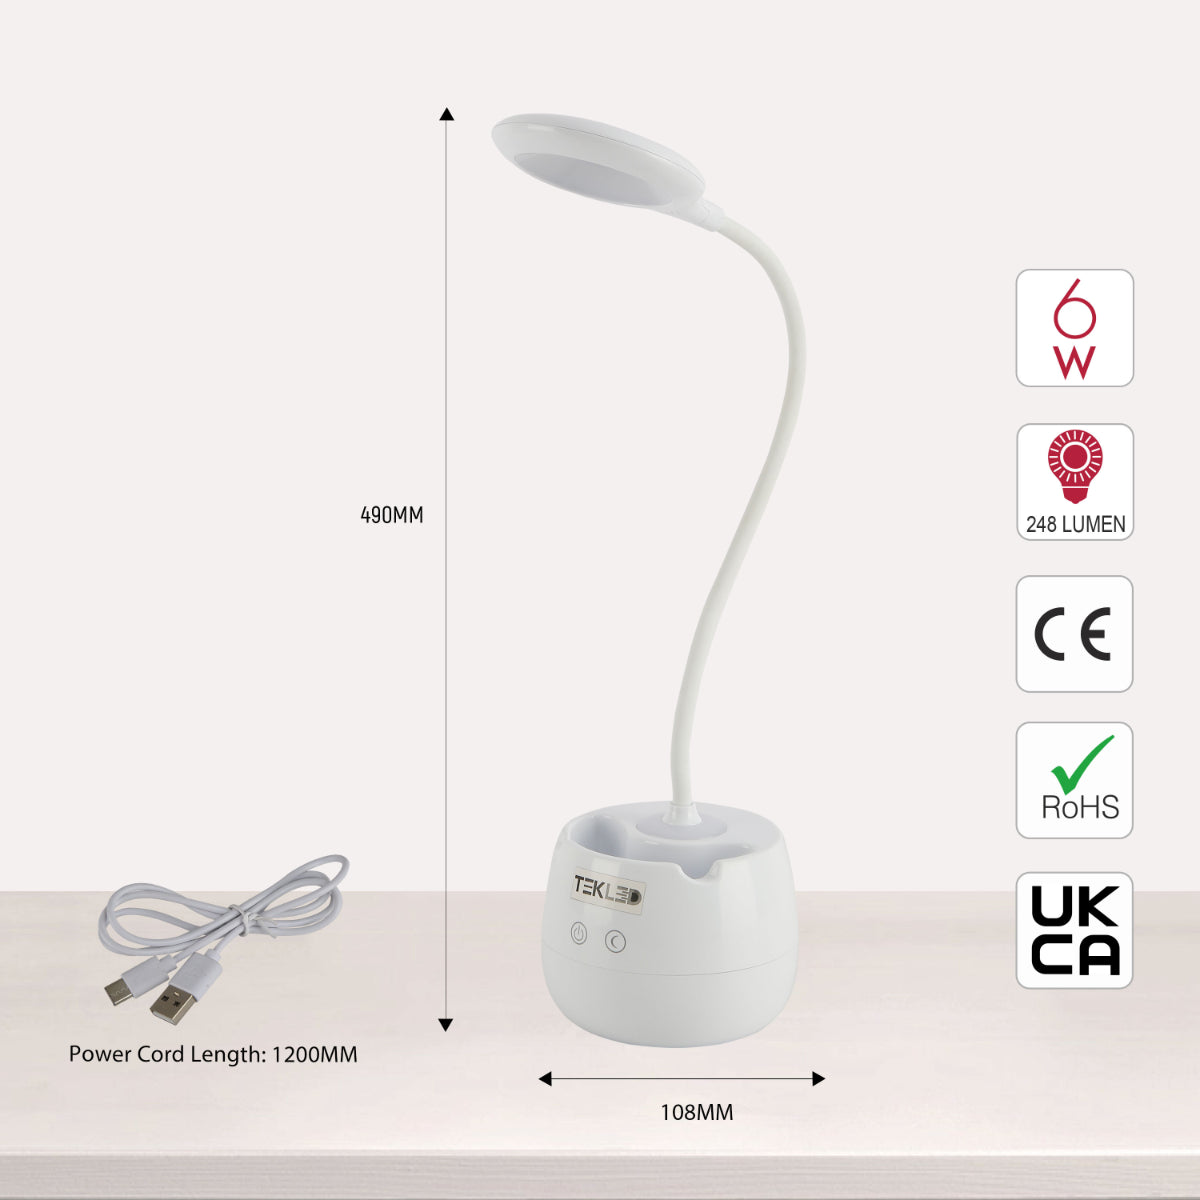 Size and certifications of Multifunctional Rechargeable LED Ring Desk Lamp with Pencil Holder 130-03760